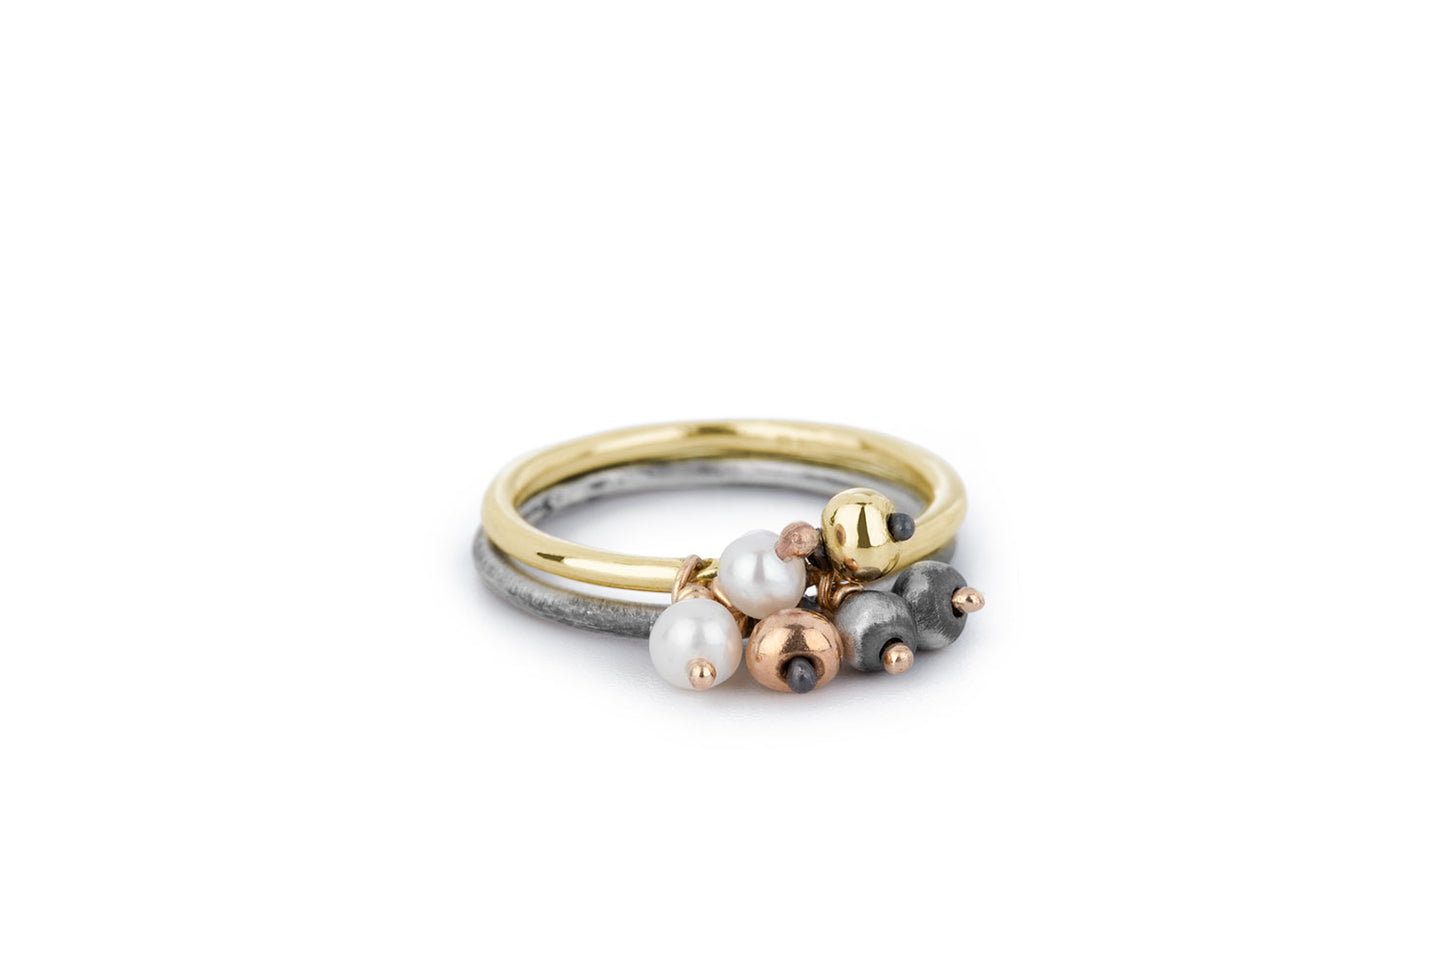 Sea ring - Silver ring with pearls